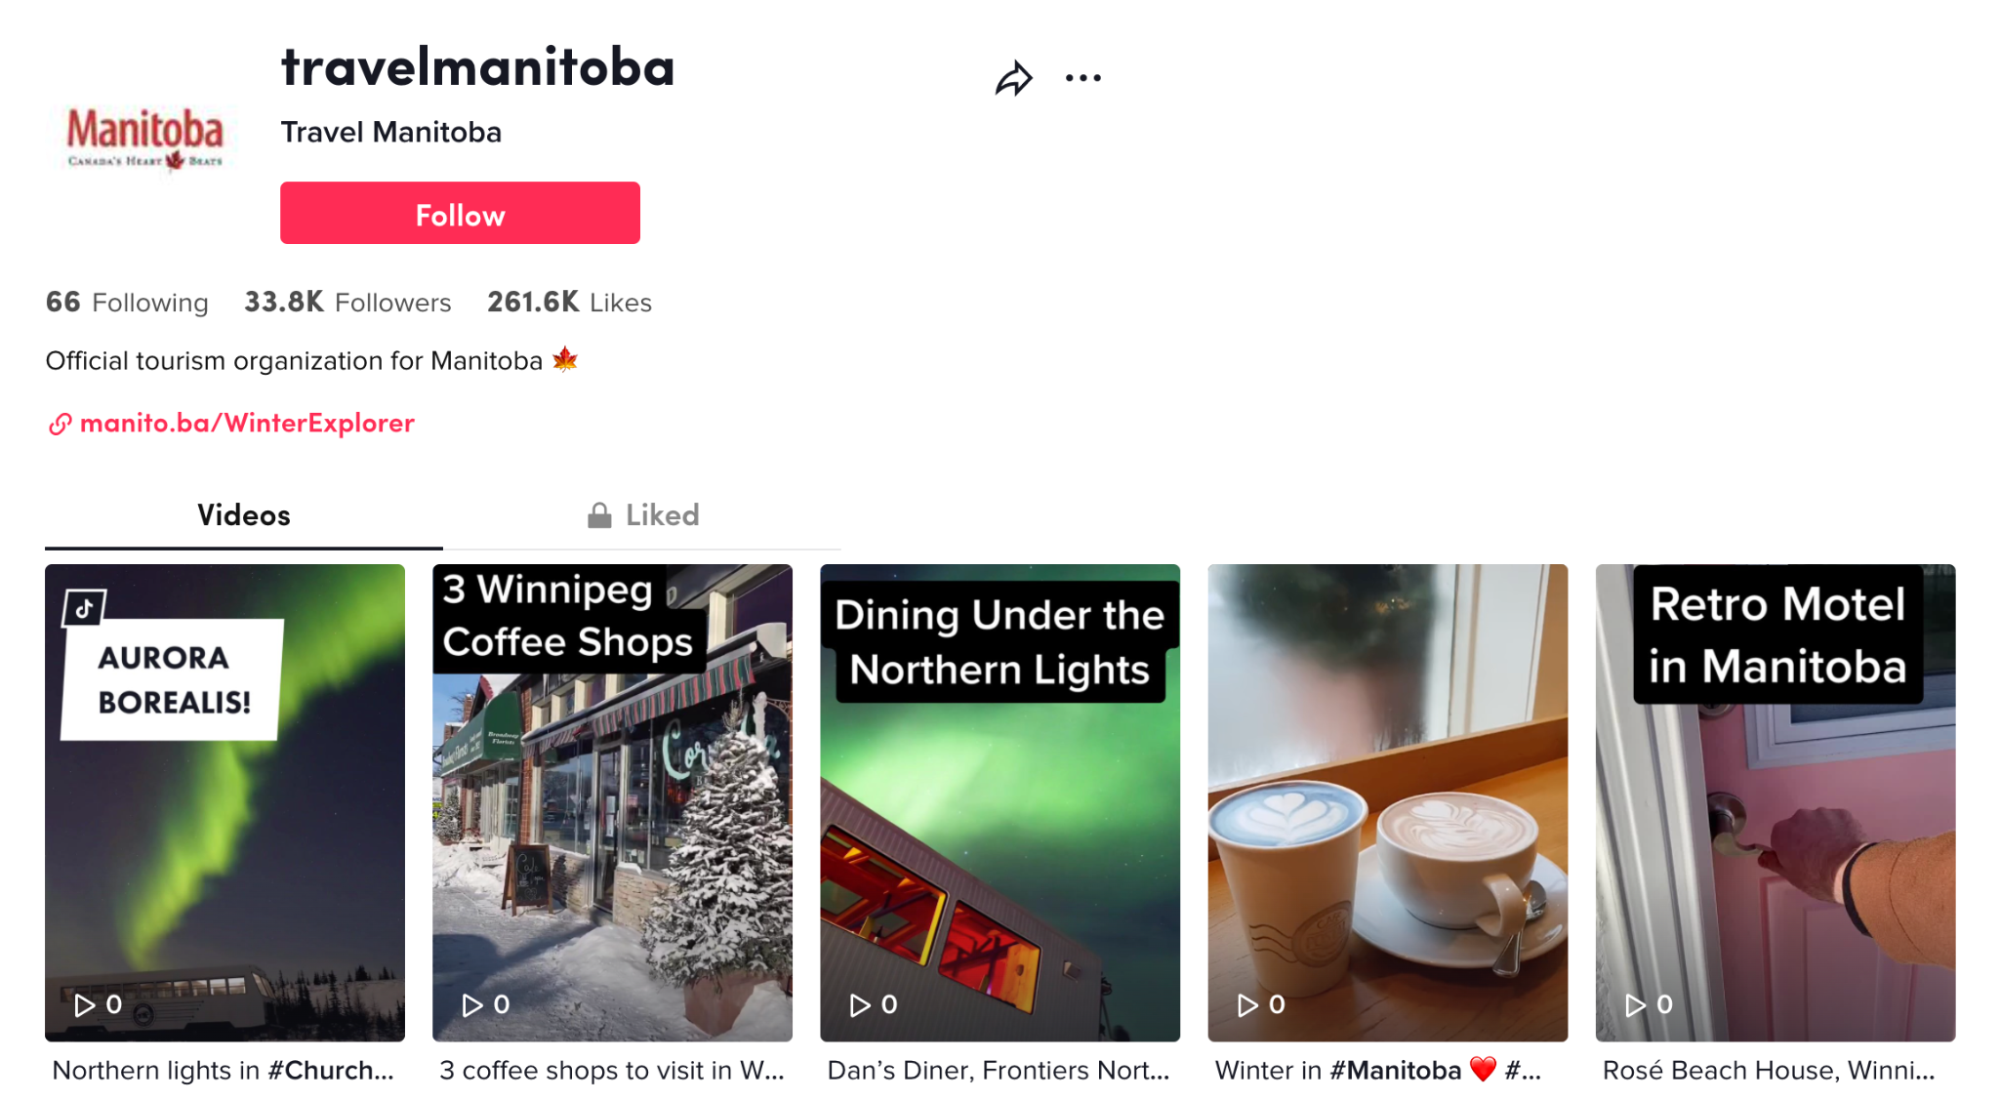 A screenshot of Travel Manitoba’s TikTok page showcases a few thumbnail images of their video guides to enjoying Manitoba. There are images of the Aurora Borealis, coffee shops, and a retro motel in Manitoba. 